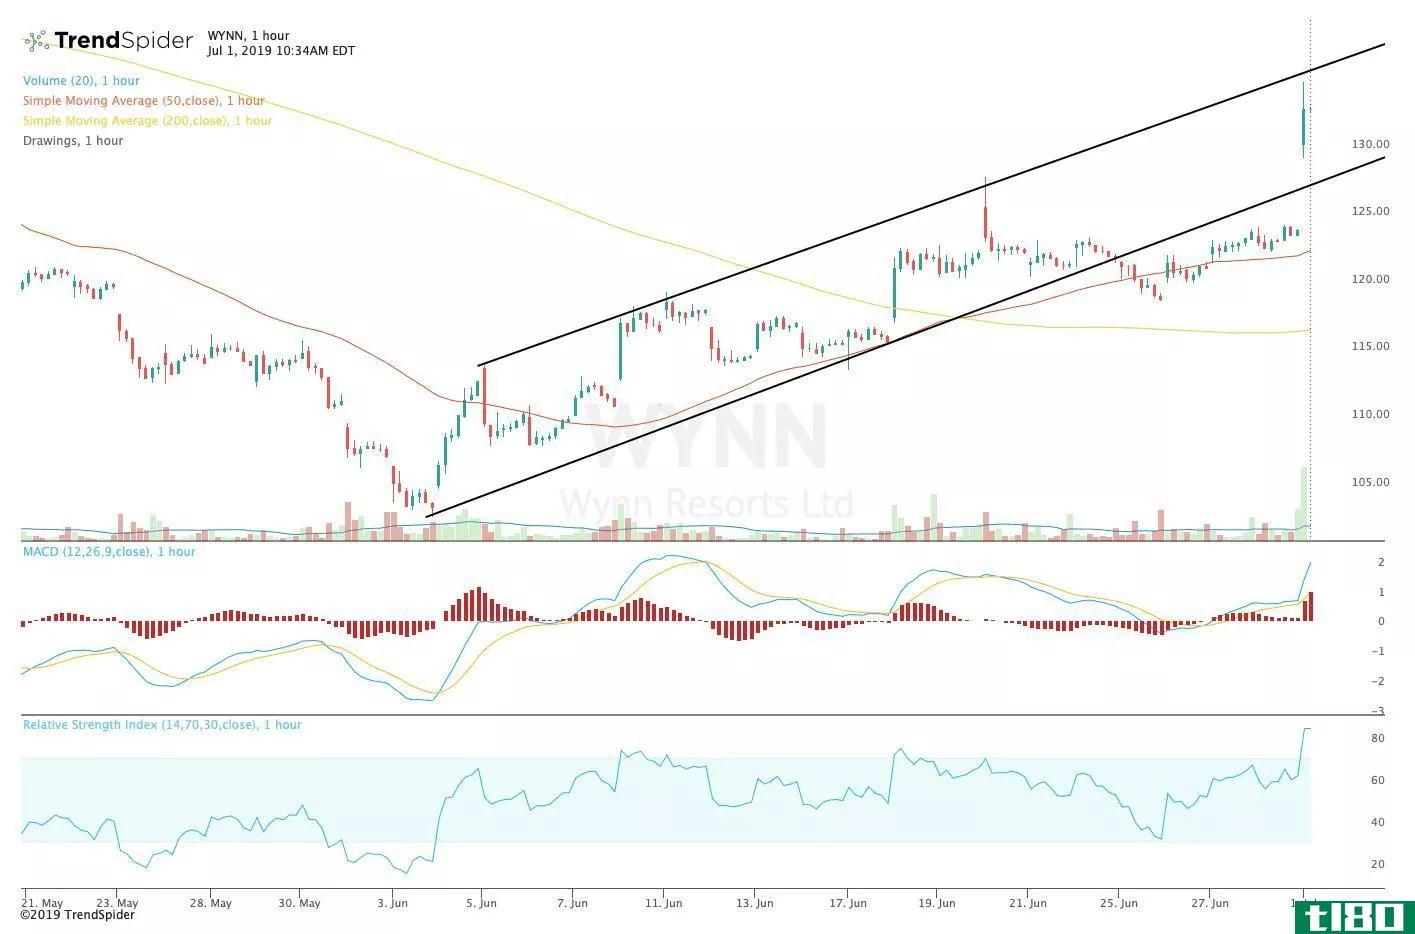 Chart showing the share price performance of Wynn Resorts, Limited. (WYNN)